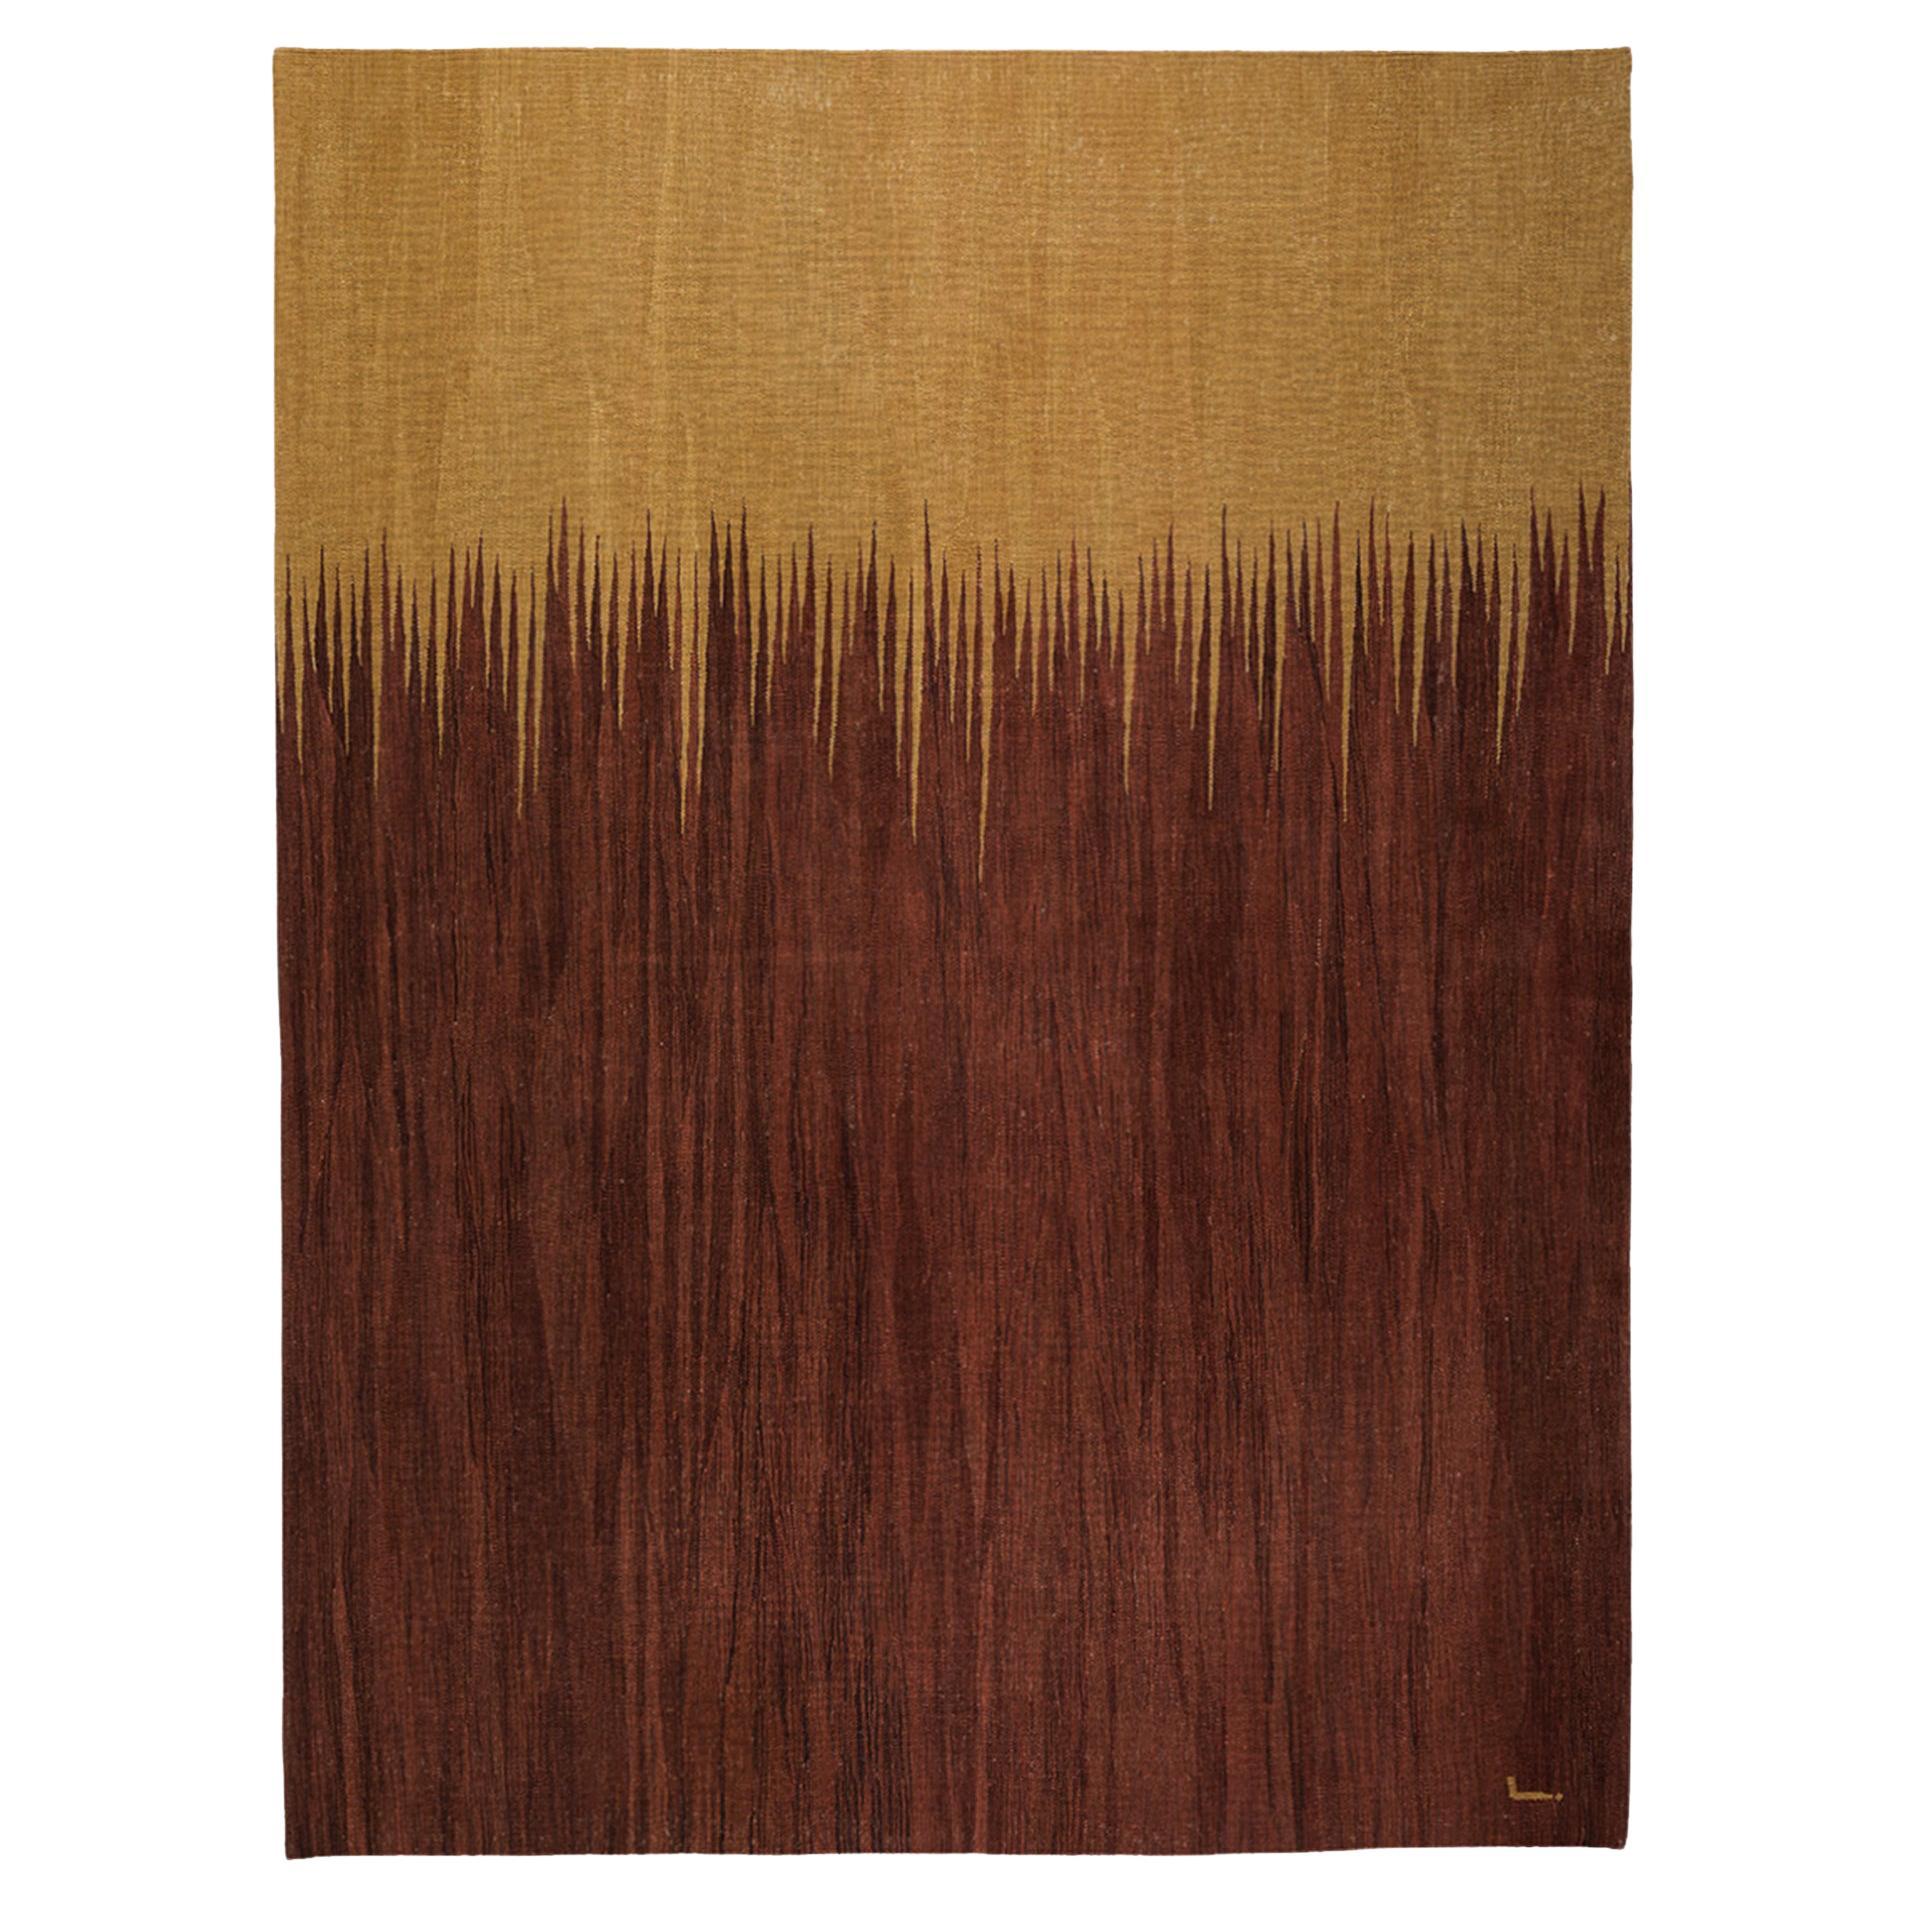 Yakamoz No 1 Contemporary Modern Kilim Rug, Wool Handwoven Maroon in Stock For Sale